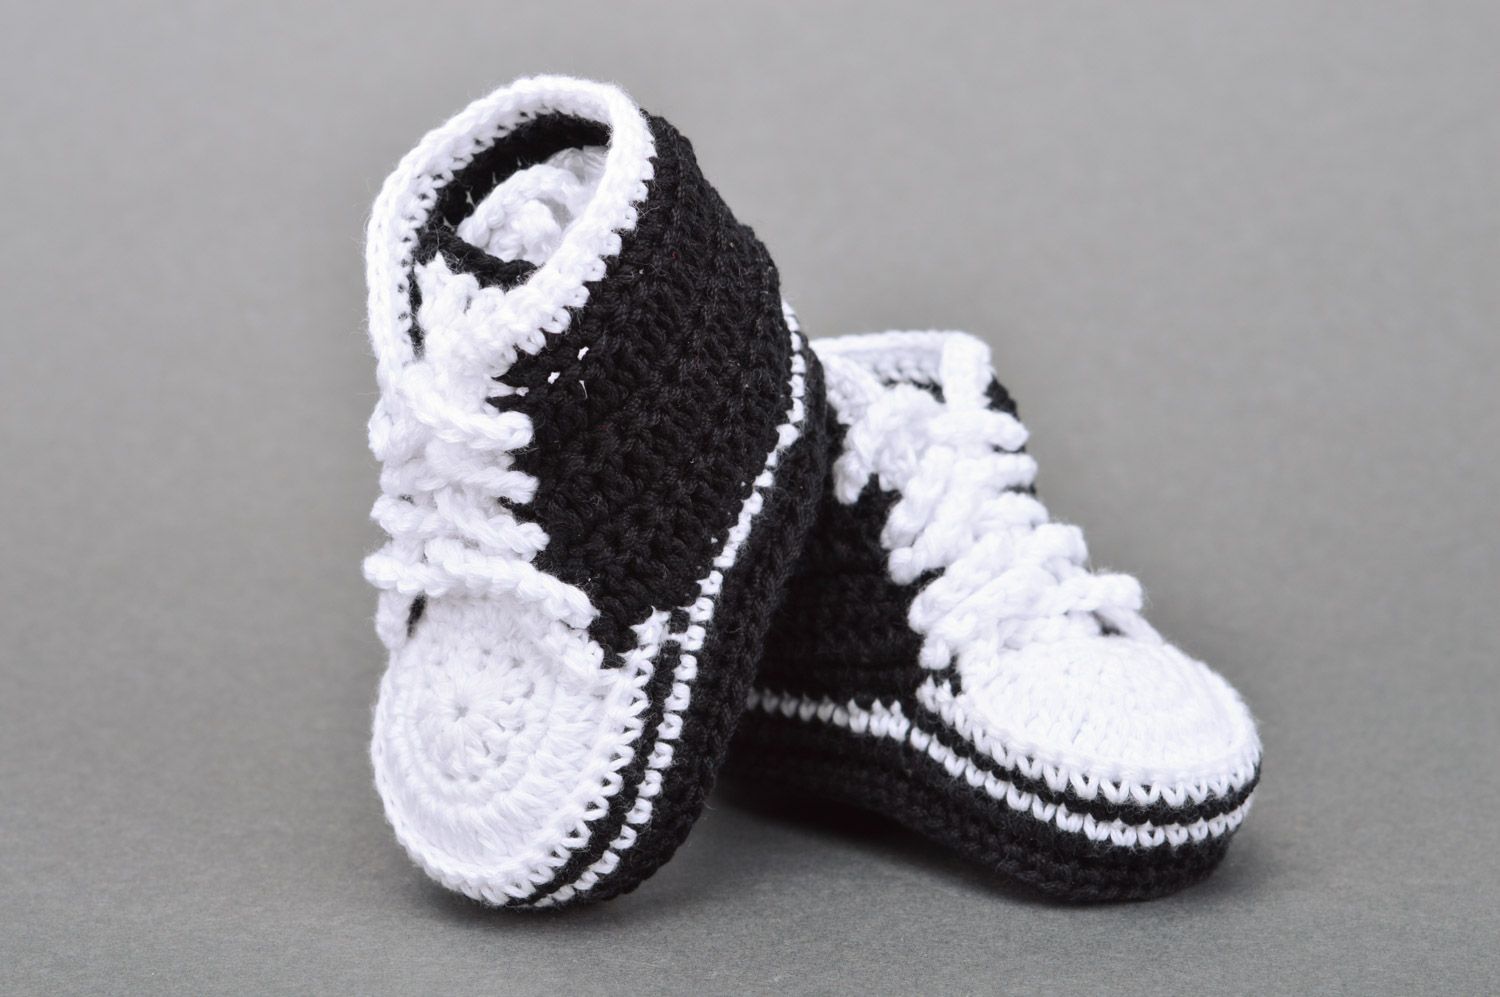 Handmade crochet baby booties in black and white colors with shoelaces photo 5